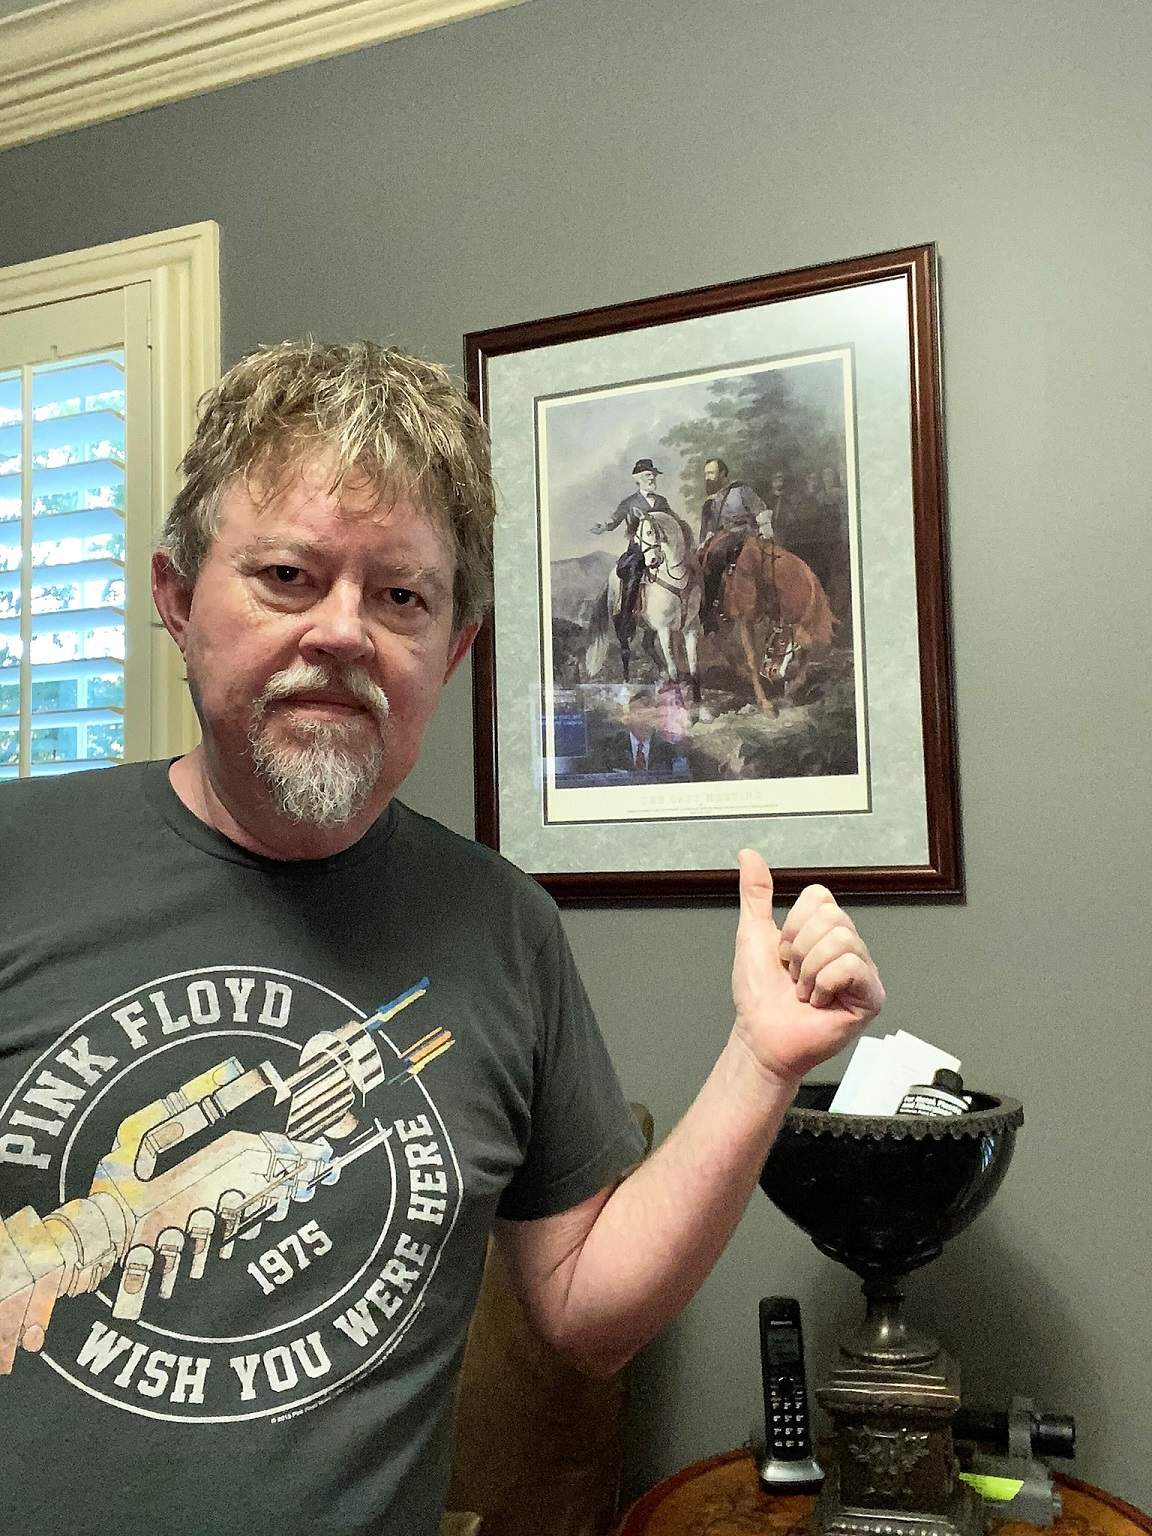 Author pointing to his picture of Robert E. Lee and Stonewall Jackson on horseback